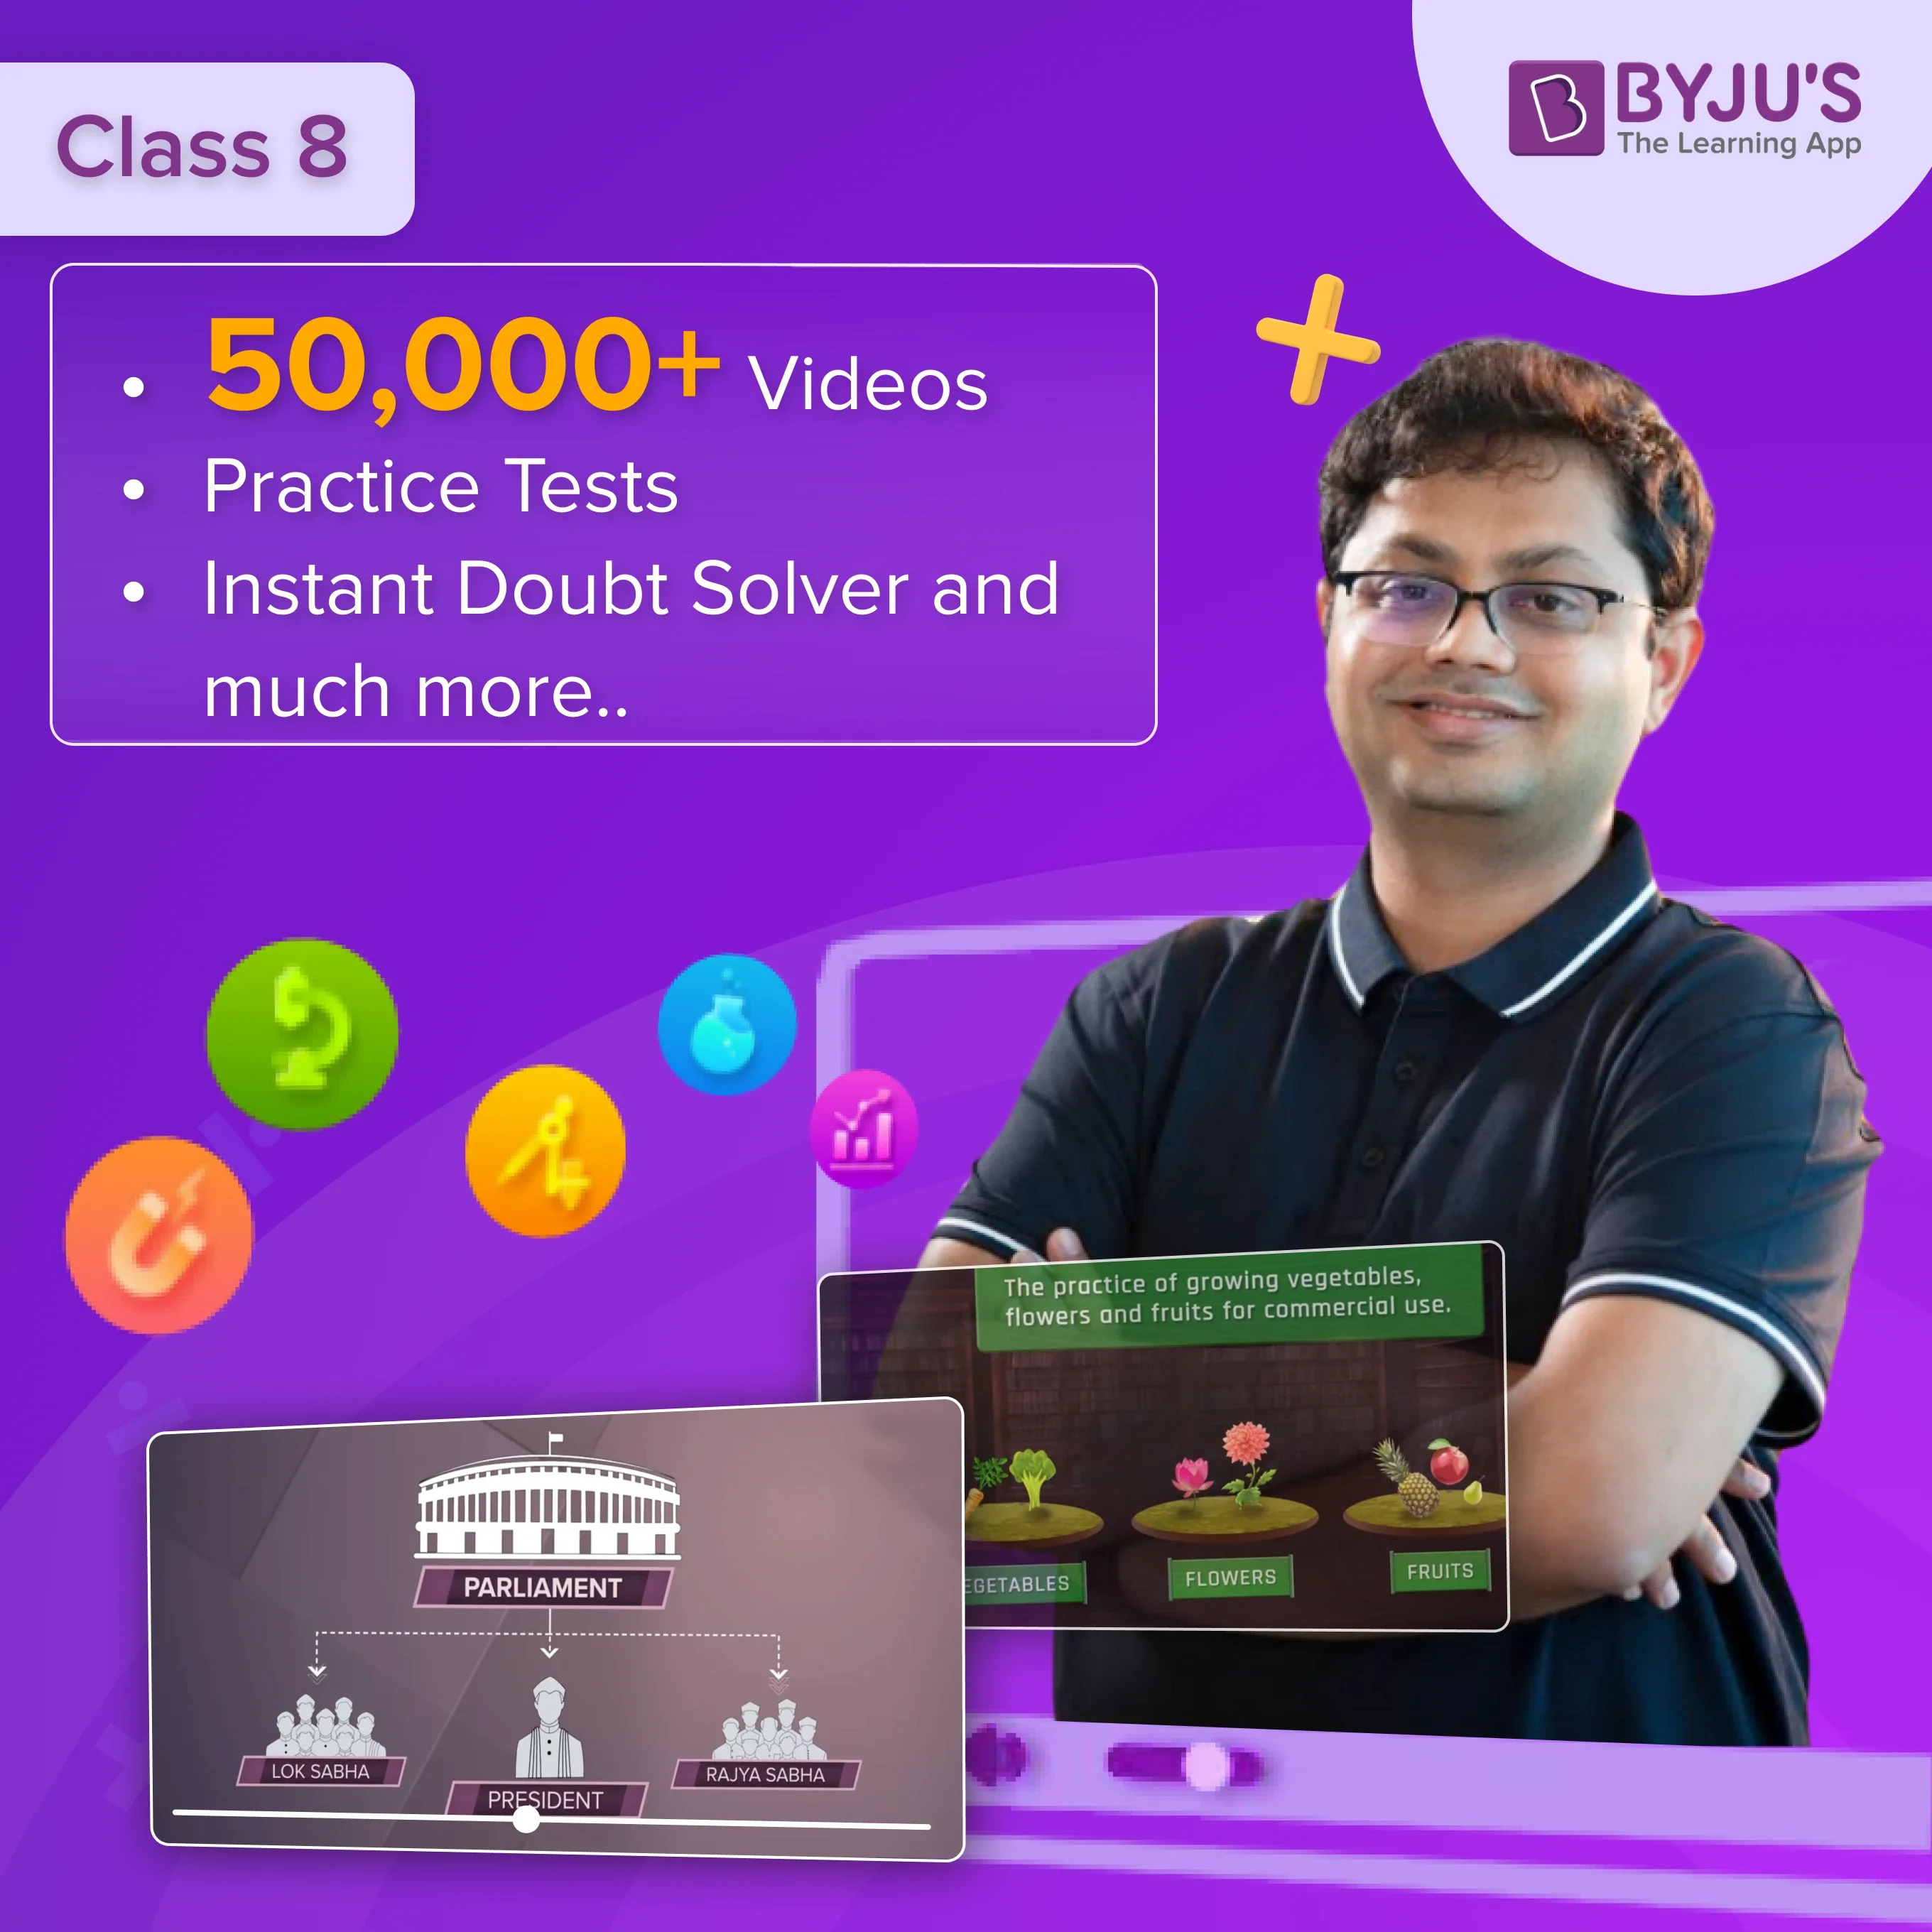 BYJU’S The Learning App - Class 8 (Renewal)